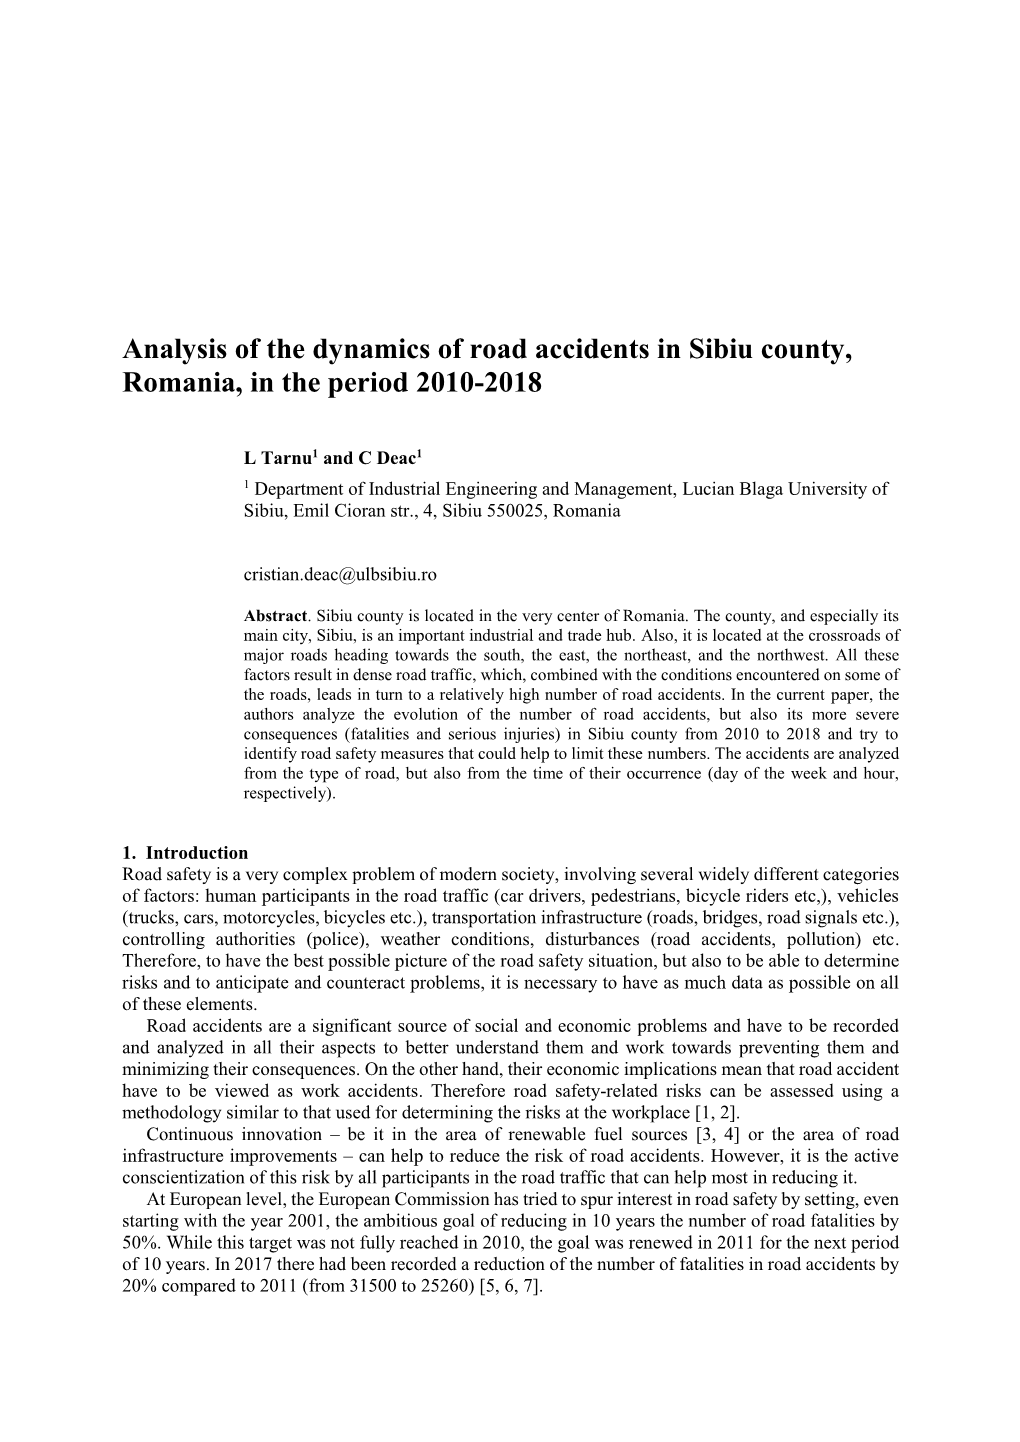 Analysis of the Dynamics of Road Accidents in Sibiu County, Romania, in the Period 2010-2018